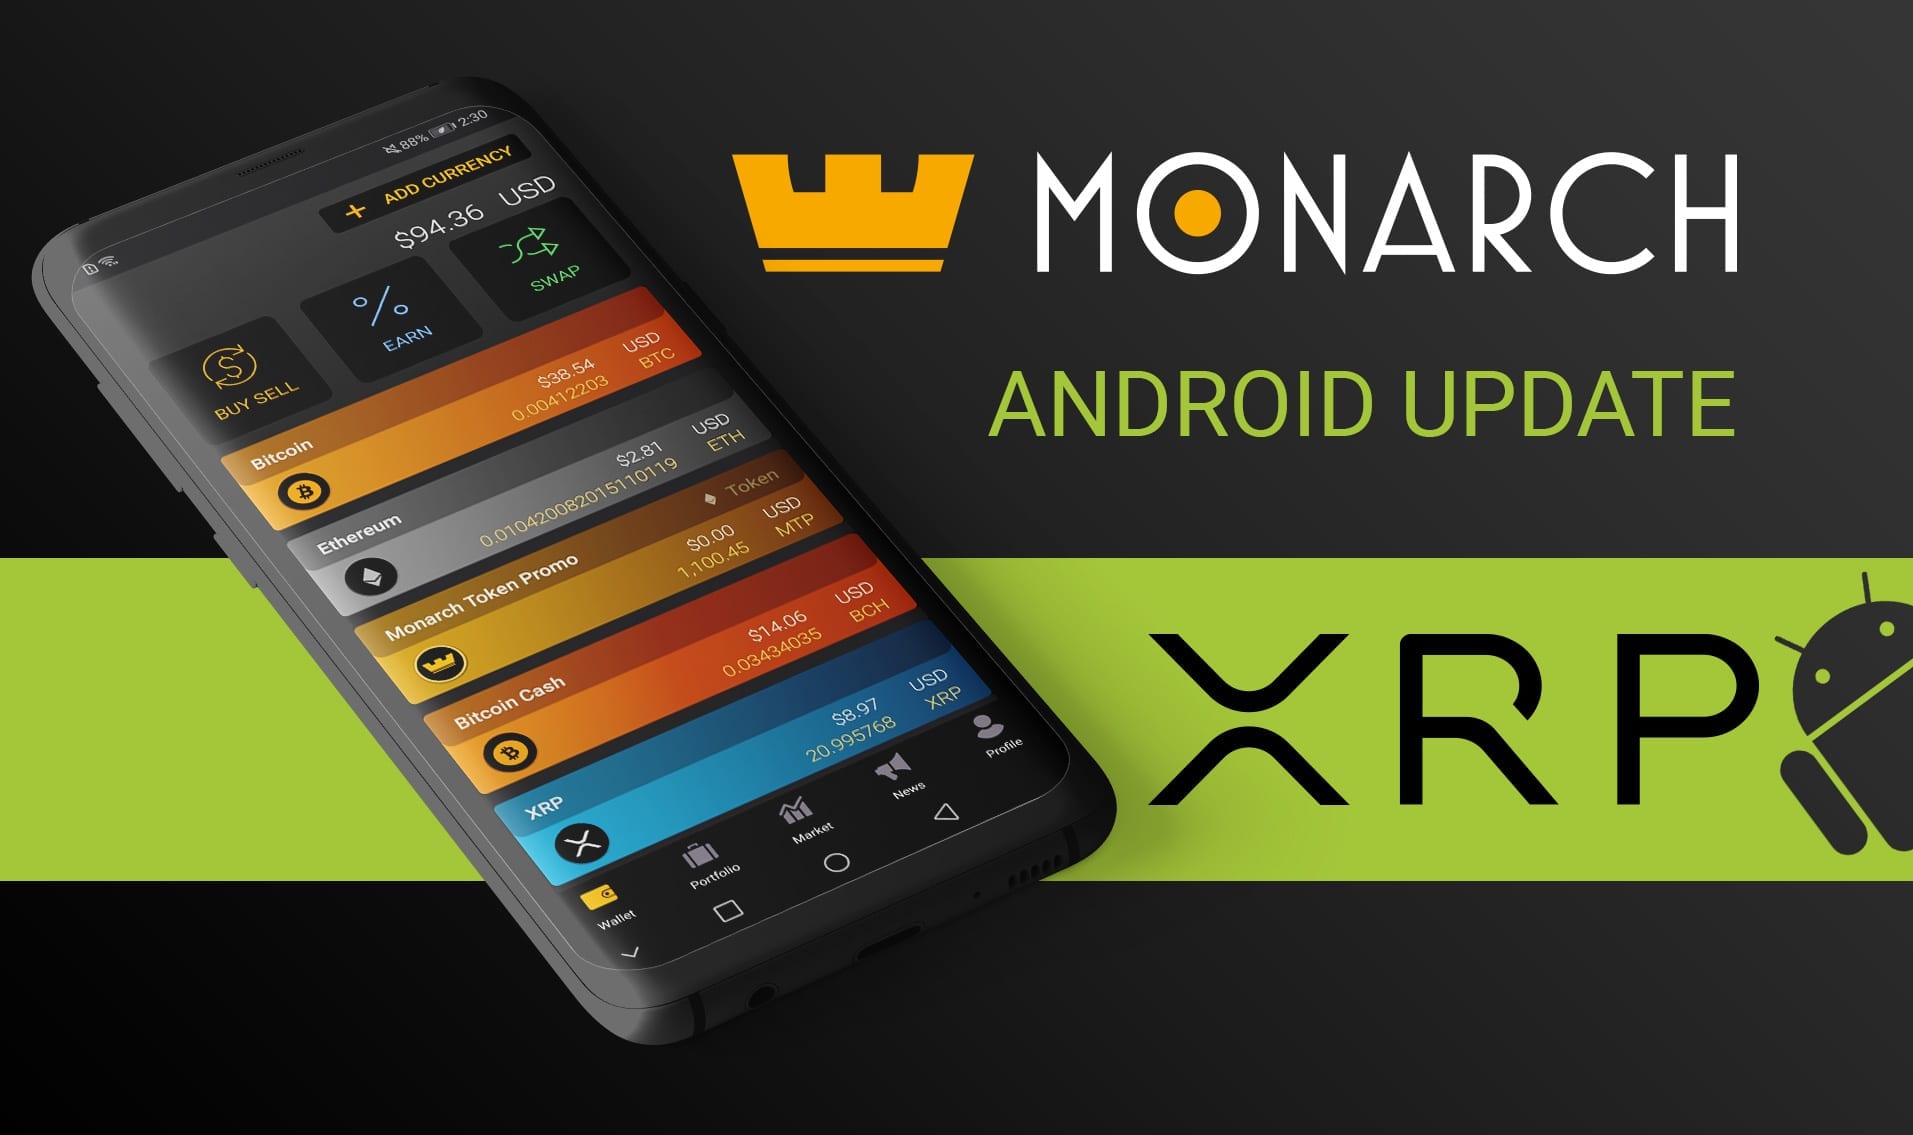 Monarch Update for Android Wallet Brings Support for Storage/Sending/Receiving & Interest Earning For Ripple (XRP) In-App